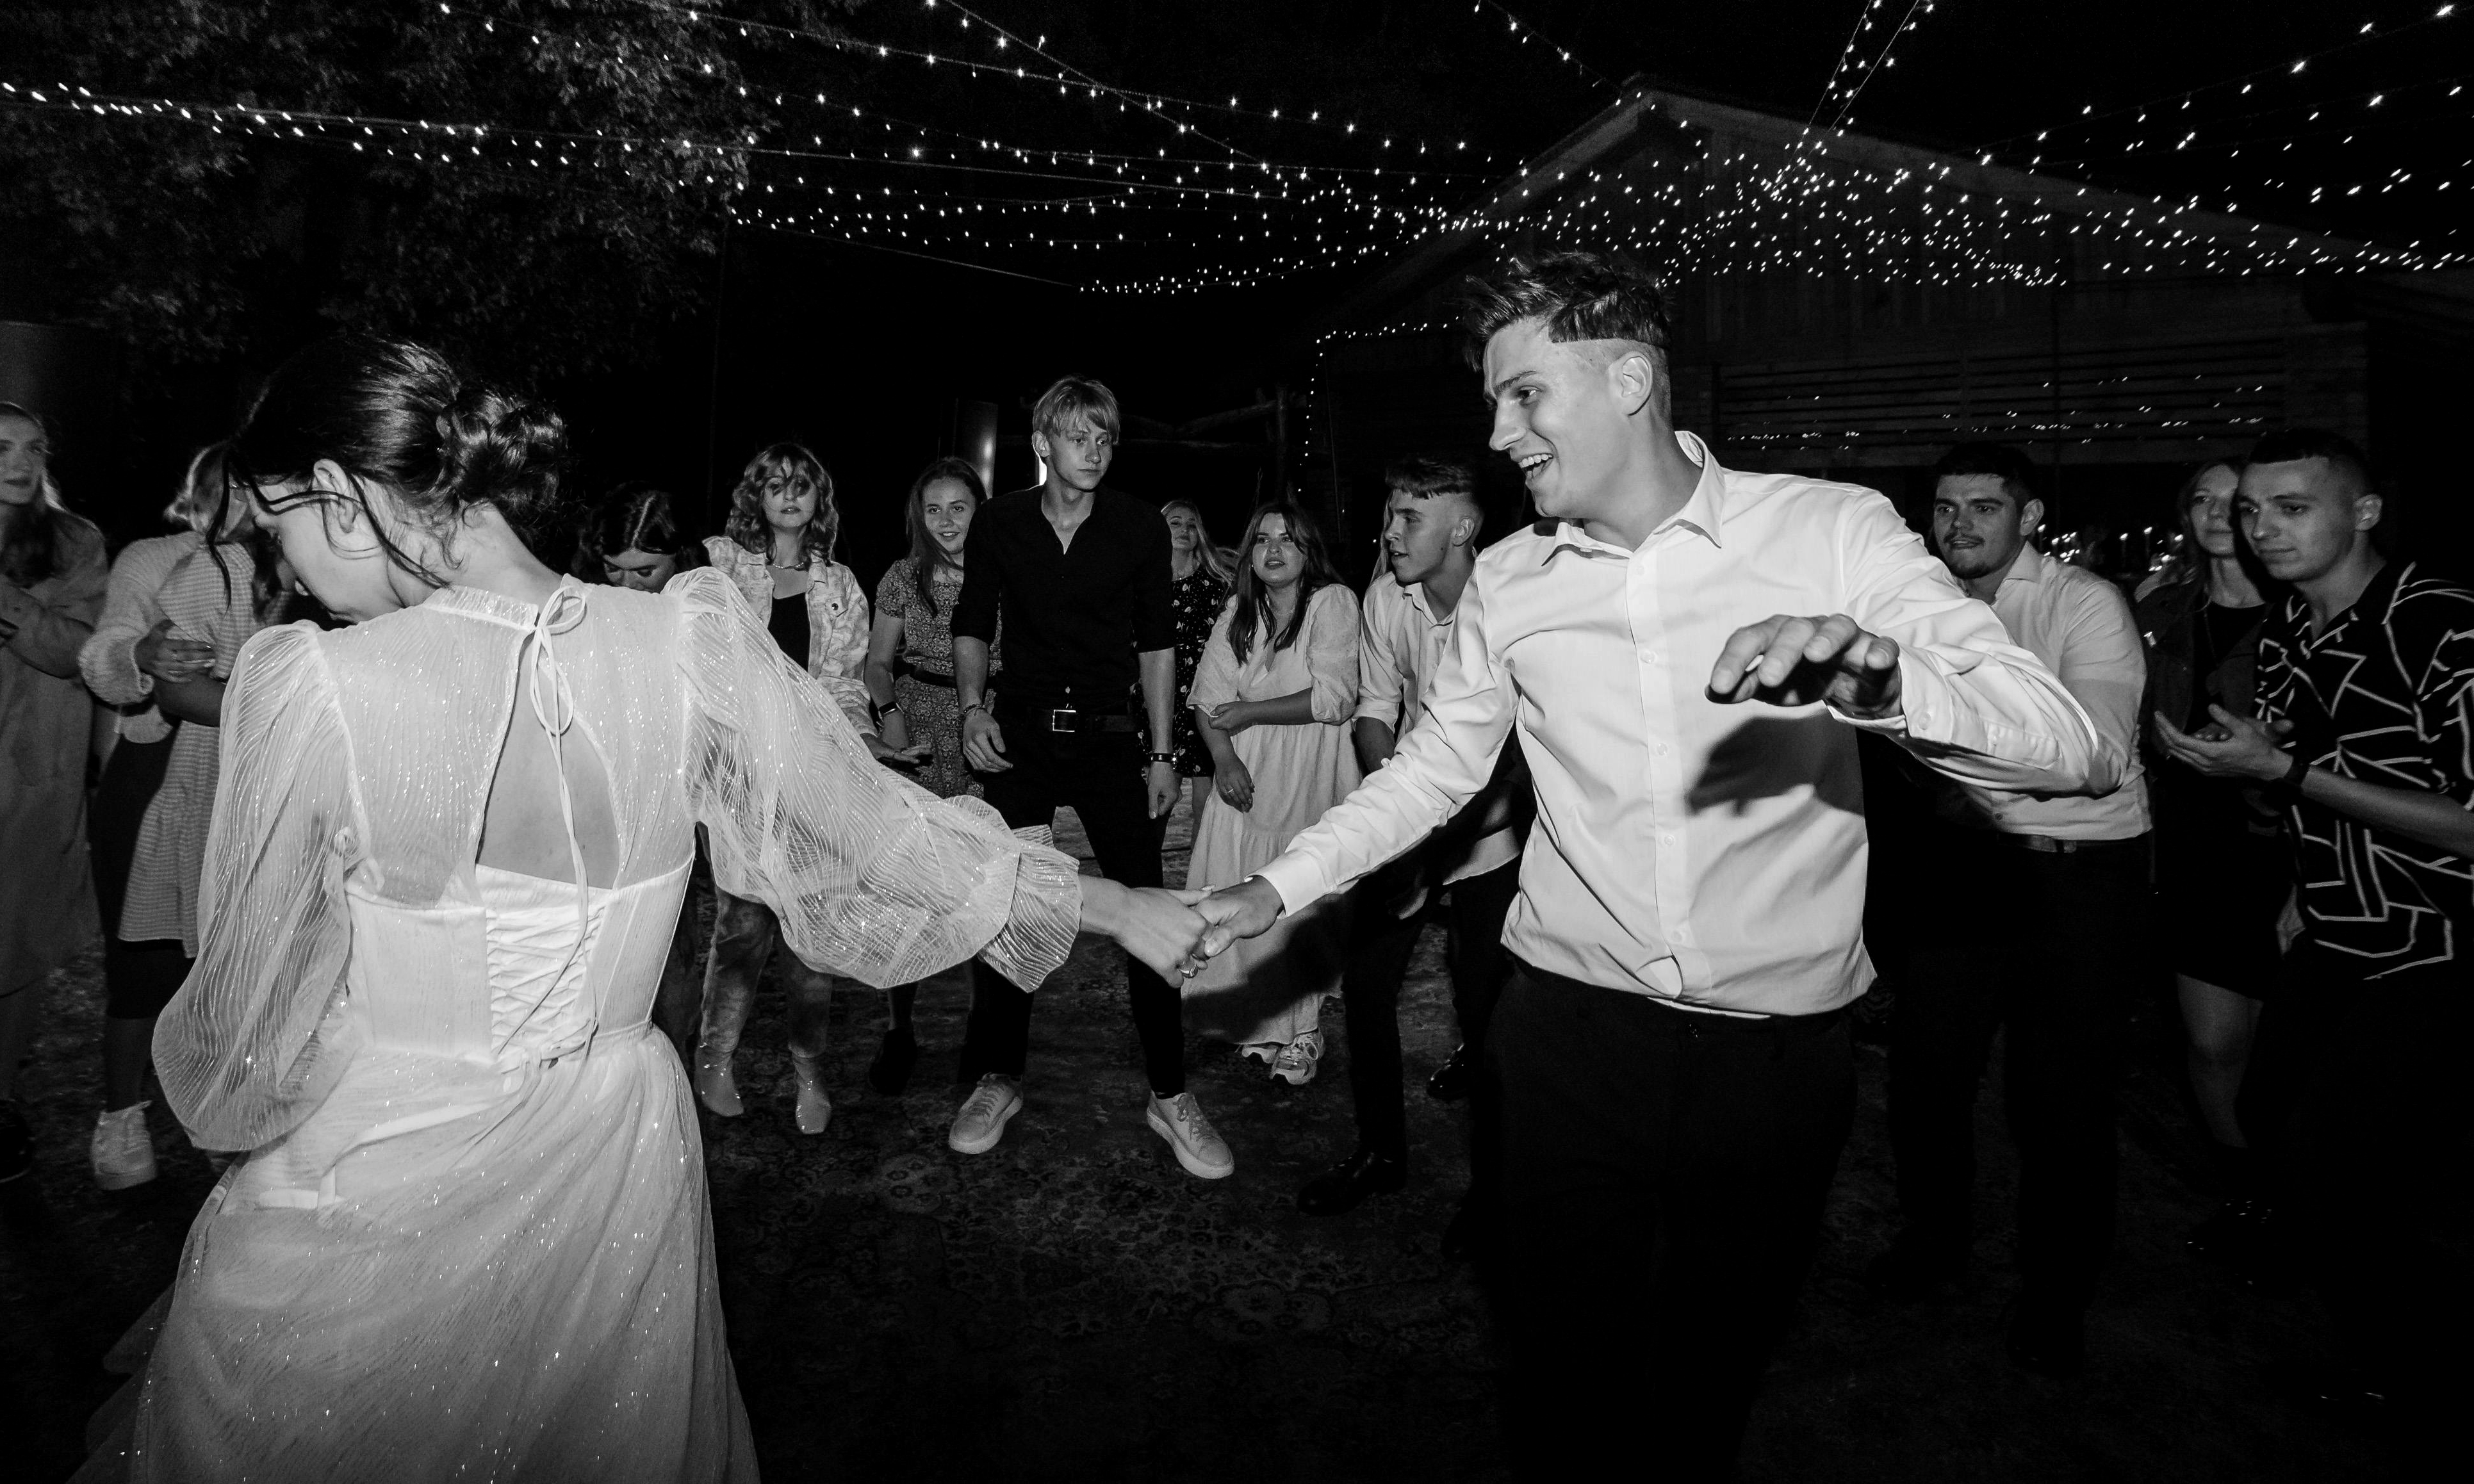 Emily and James sharing their first dance | Source: Pexels